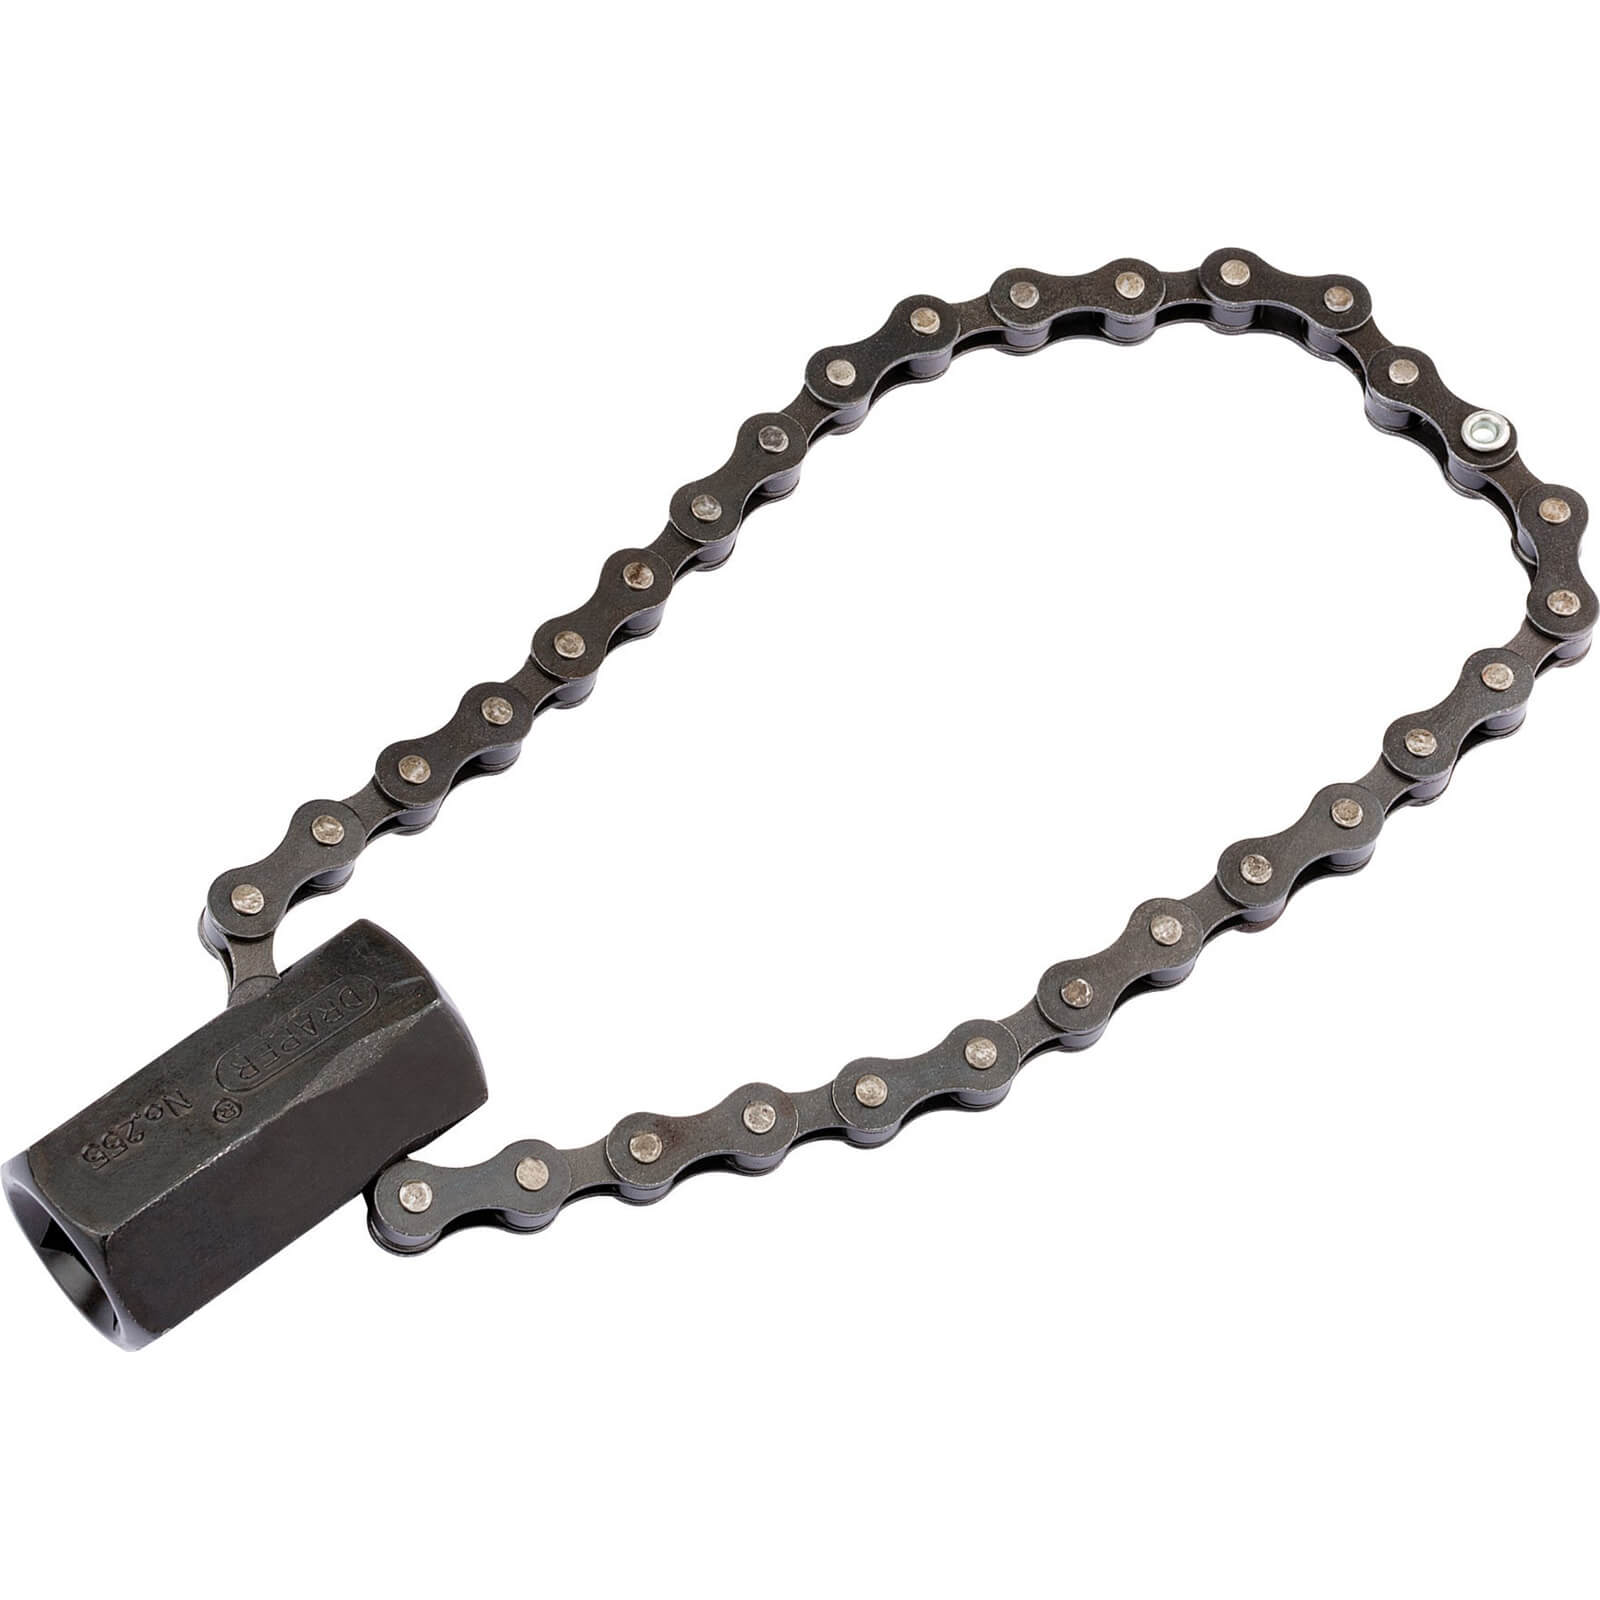 Image of Draper 1/2" Drive Chain Oil Filter Wrench 130mm